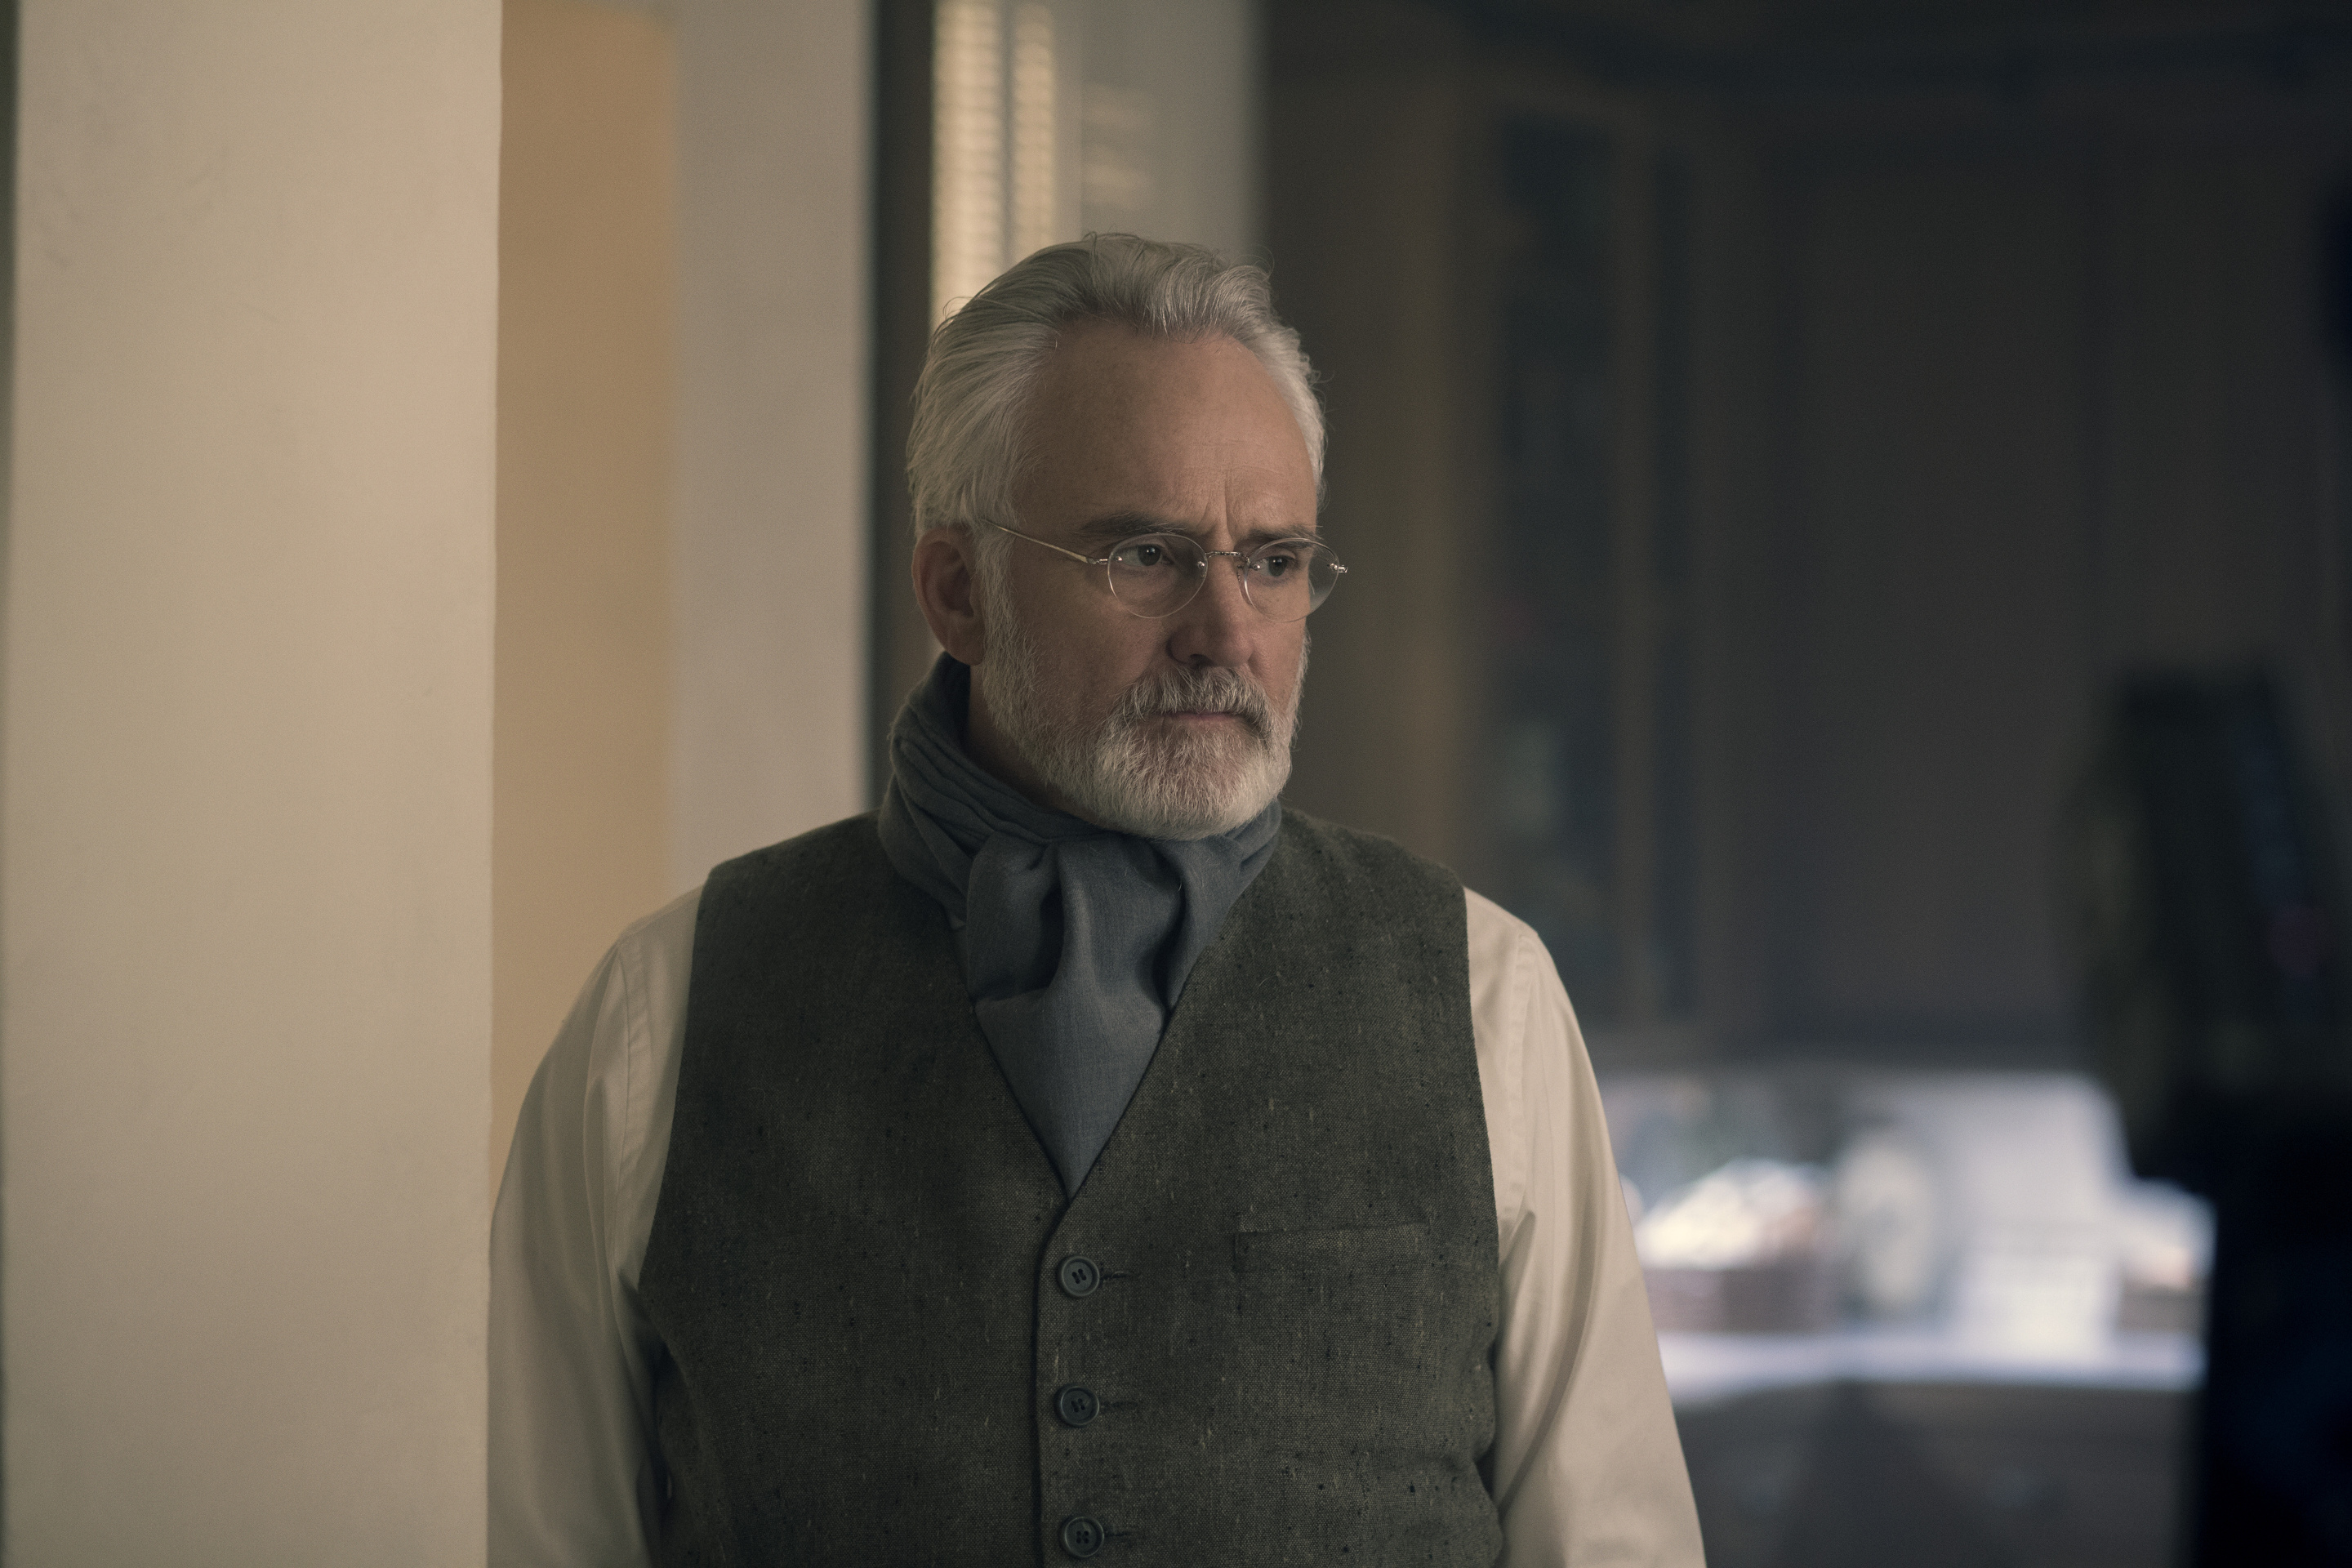 The Handmaid's Tale -- "Household" - Episode 306 -- June accompanies the Waterfords to Washington D.C., where a powerful family offers a glimpse of the future of Gilead. June makes an important connection as she attempts to protect Nichole. Joseph (Bradley Whitford), shown. (Sophie Giraud—Hulu)